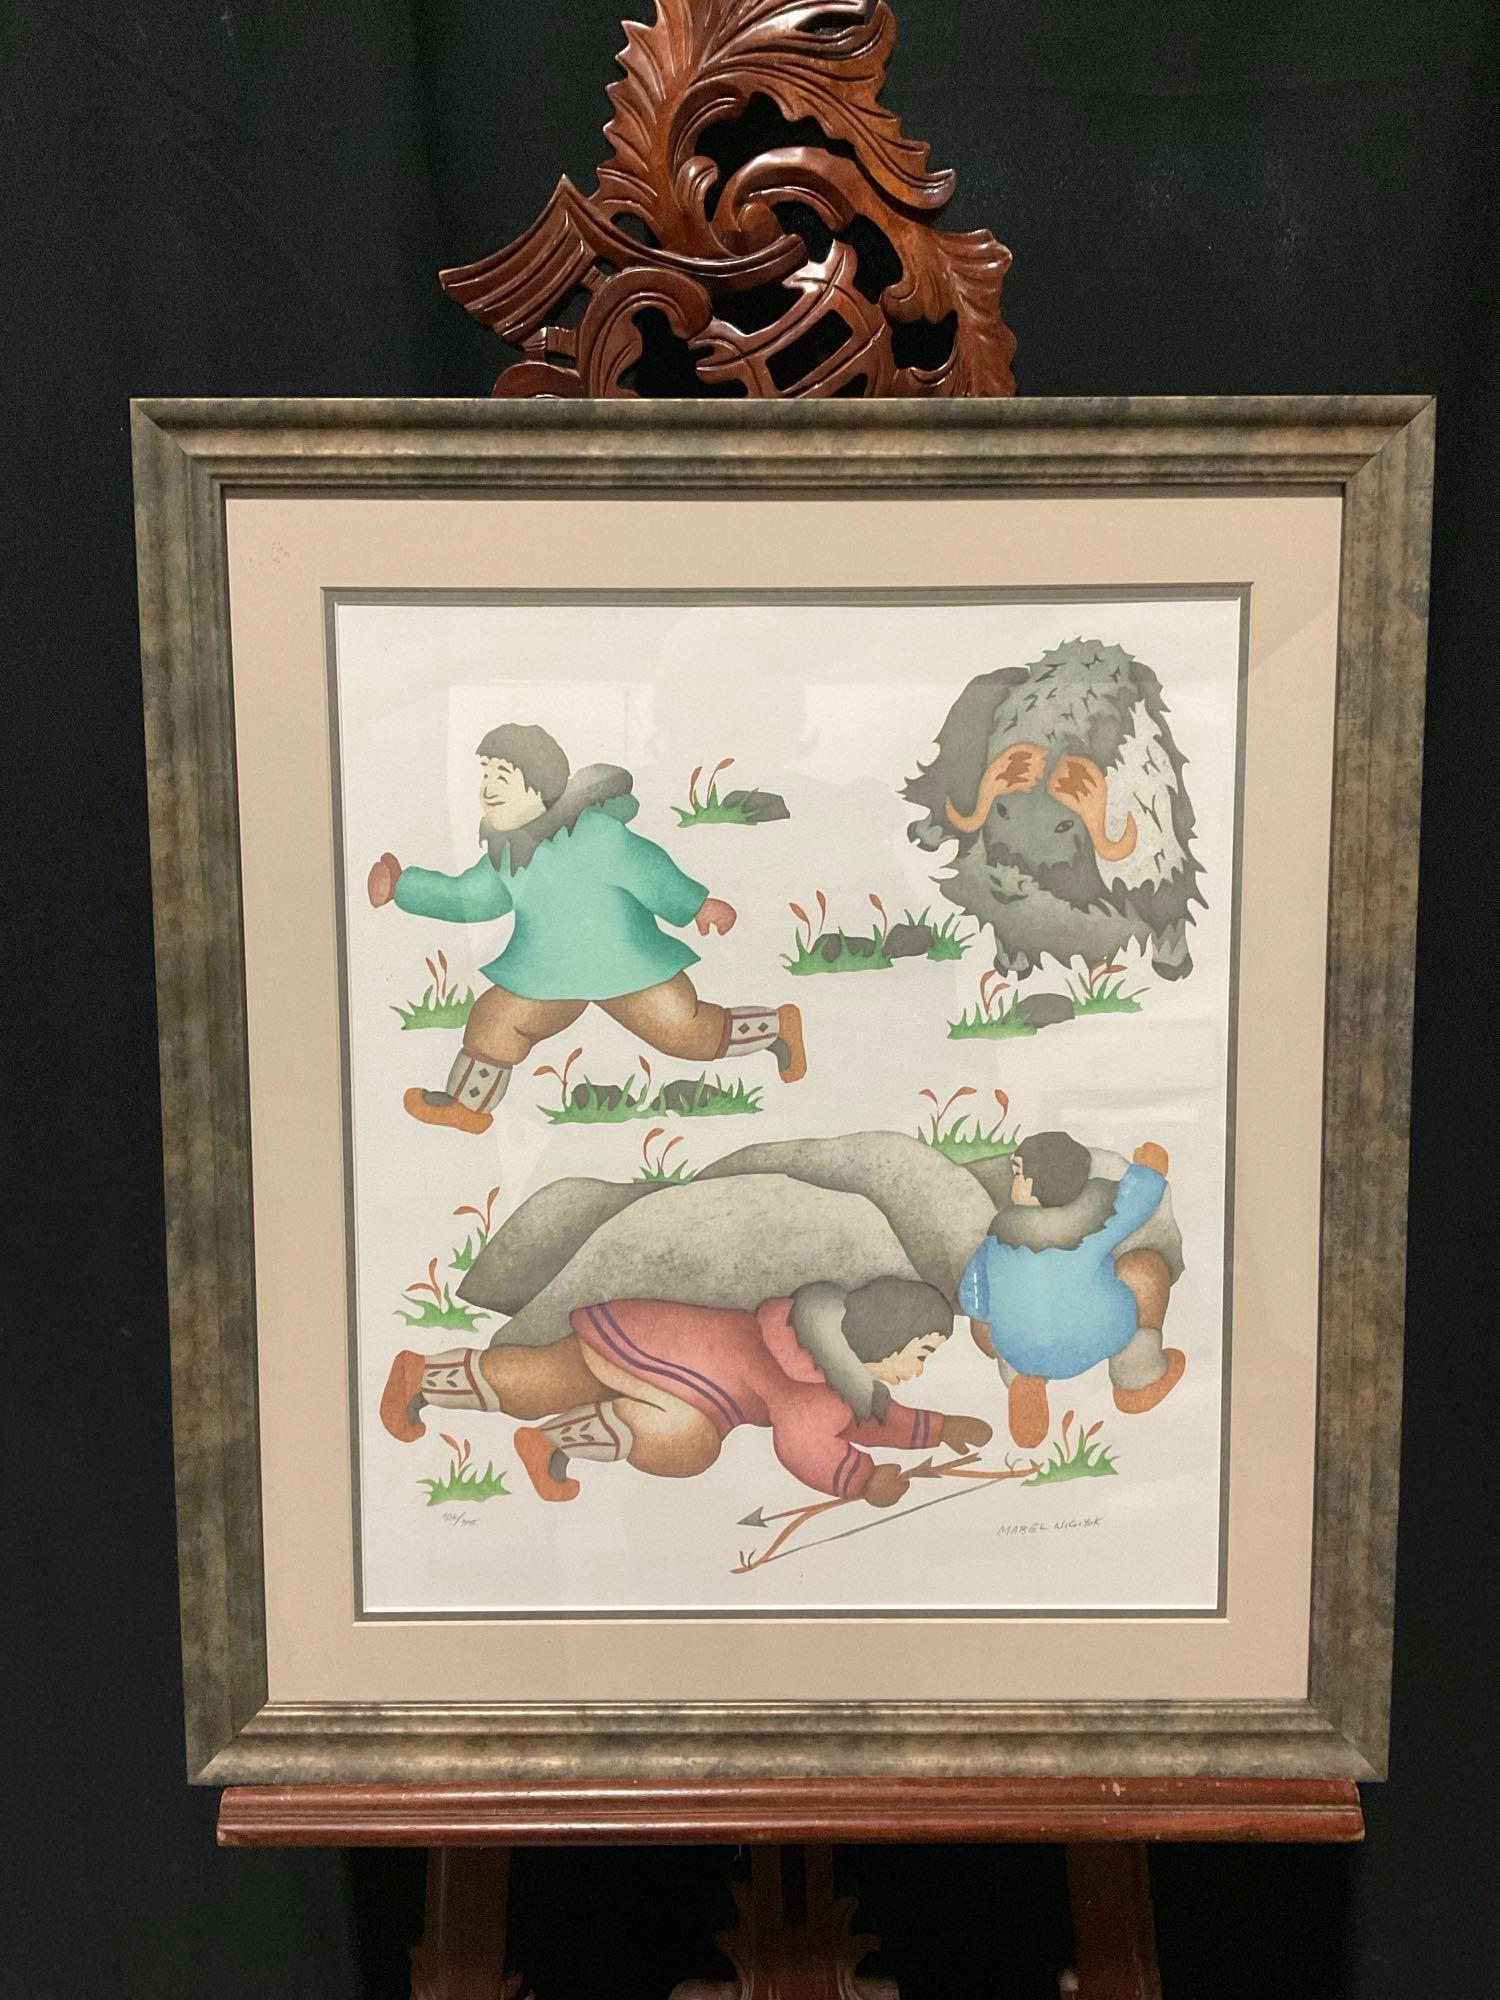 Framed Lithograph "Running Away From Musk-Ox" by Mabel Nigiyok. Ltd Ed 336/395, Signed. See pics.